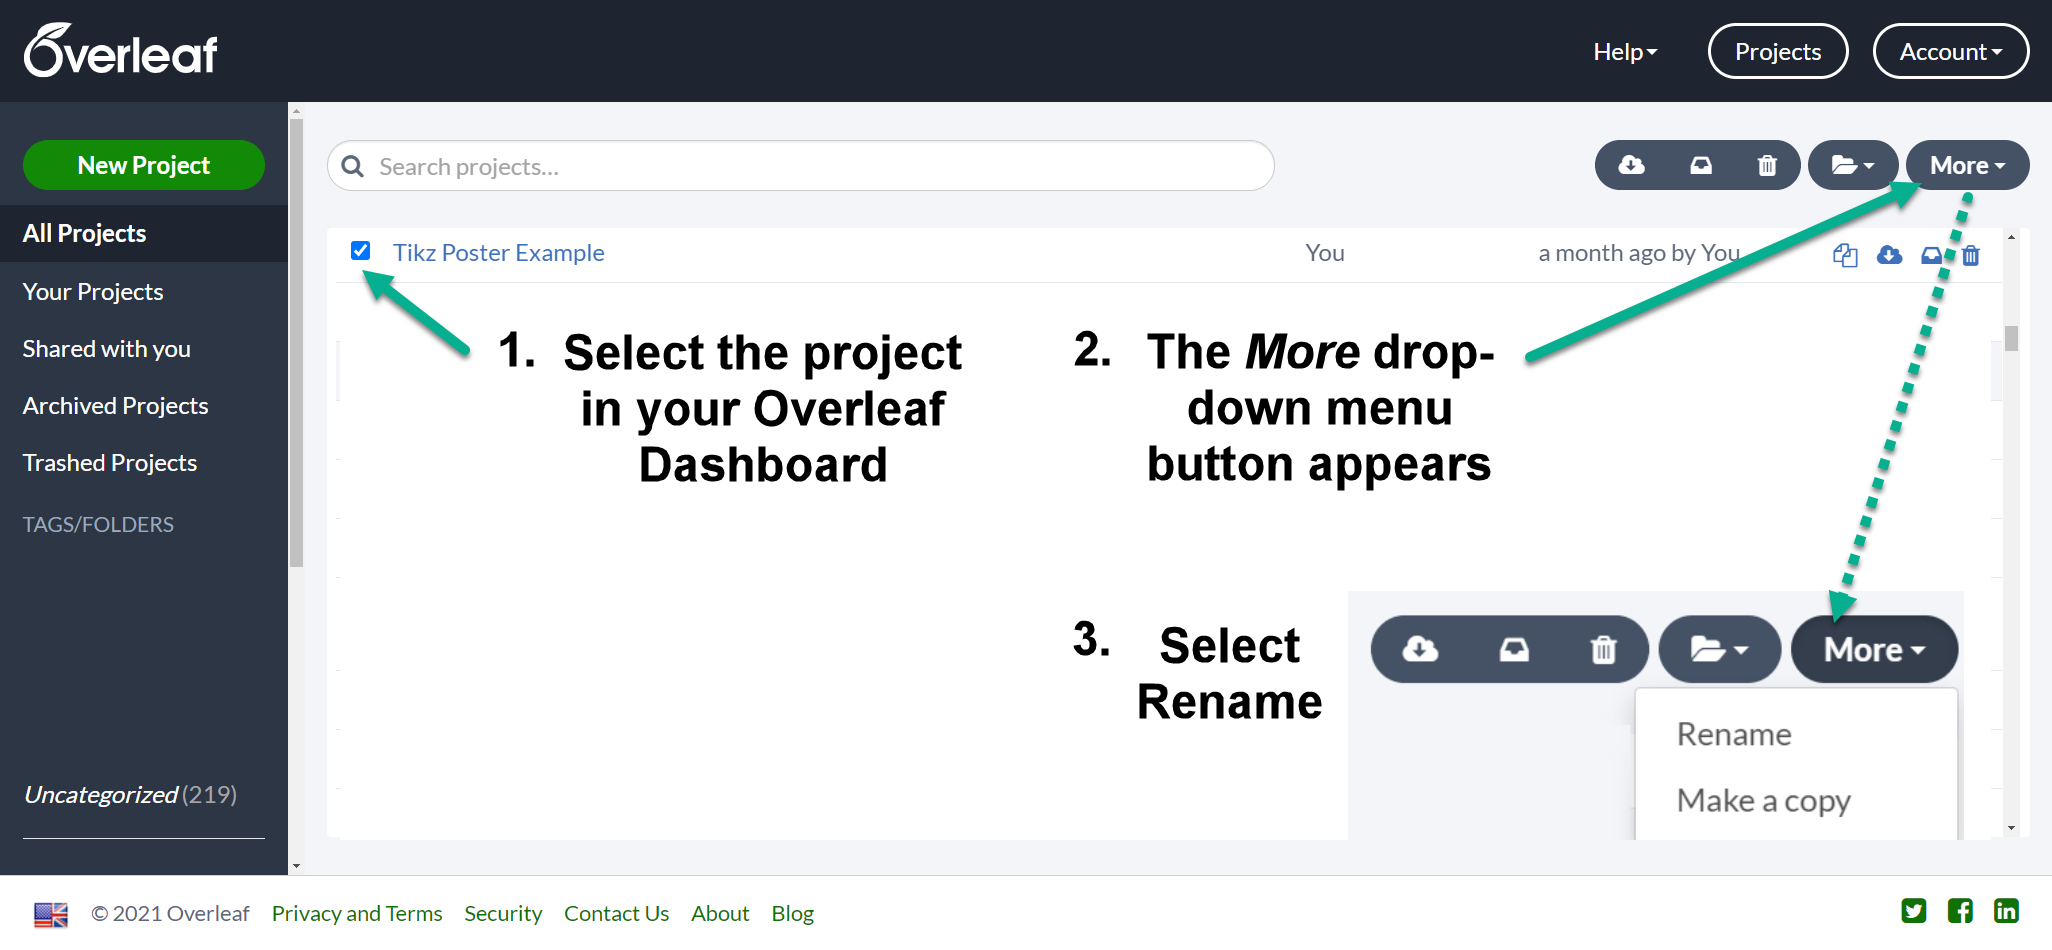 Renaming a project in Overleaf